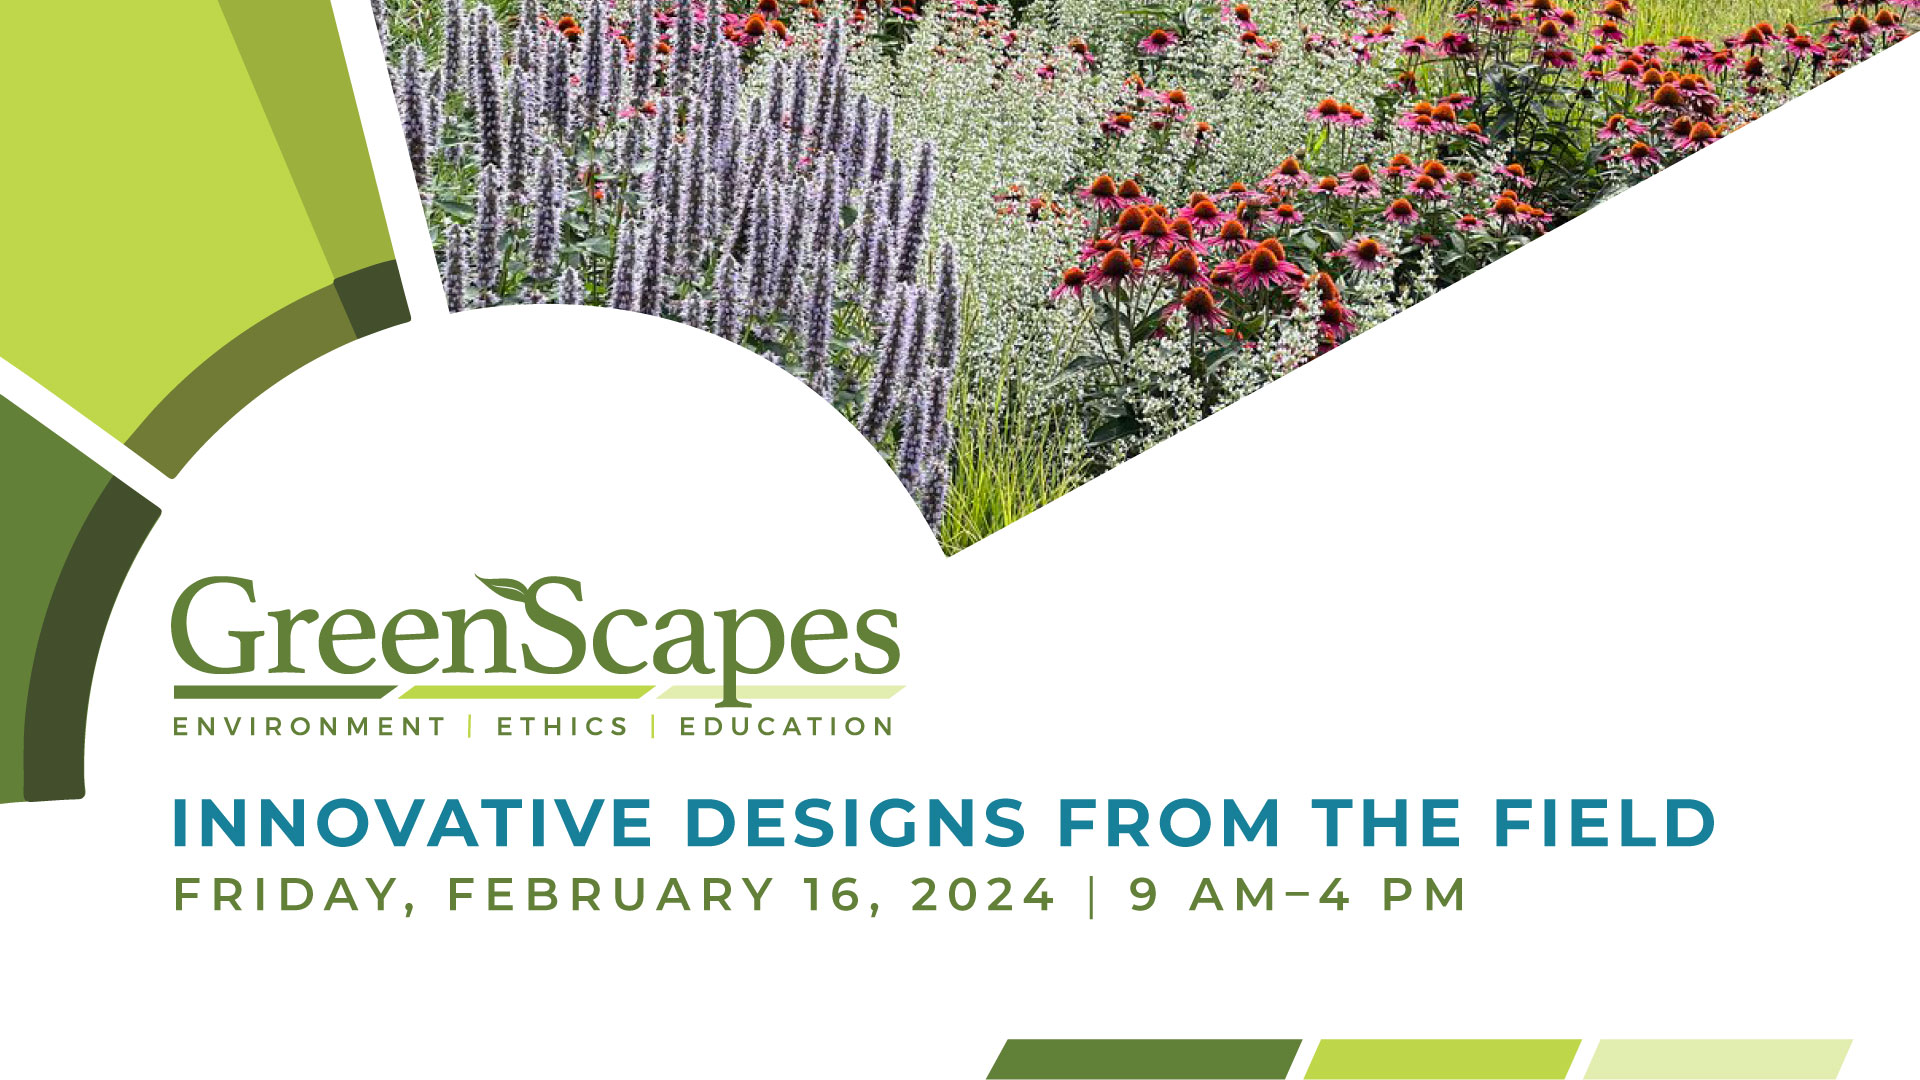 GreenScapes Symposium 2024 Event - Innovative Designs From the Field / Friday, February 14, 2024 / 9am to 4pm